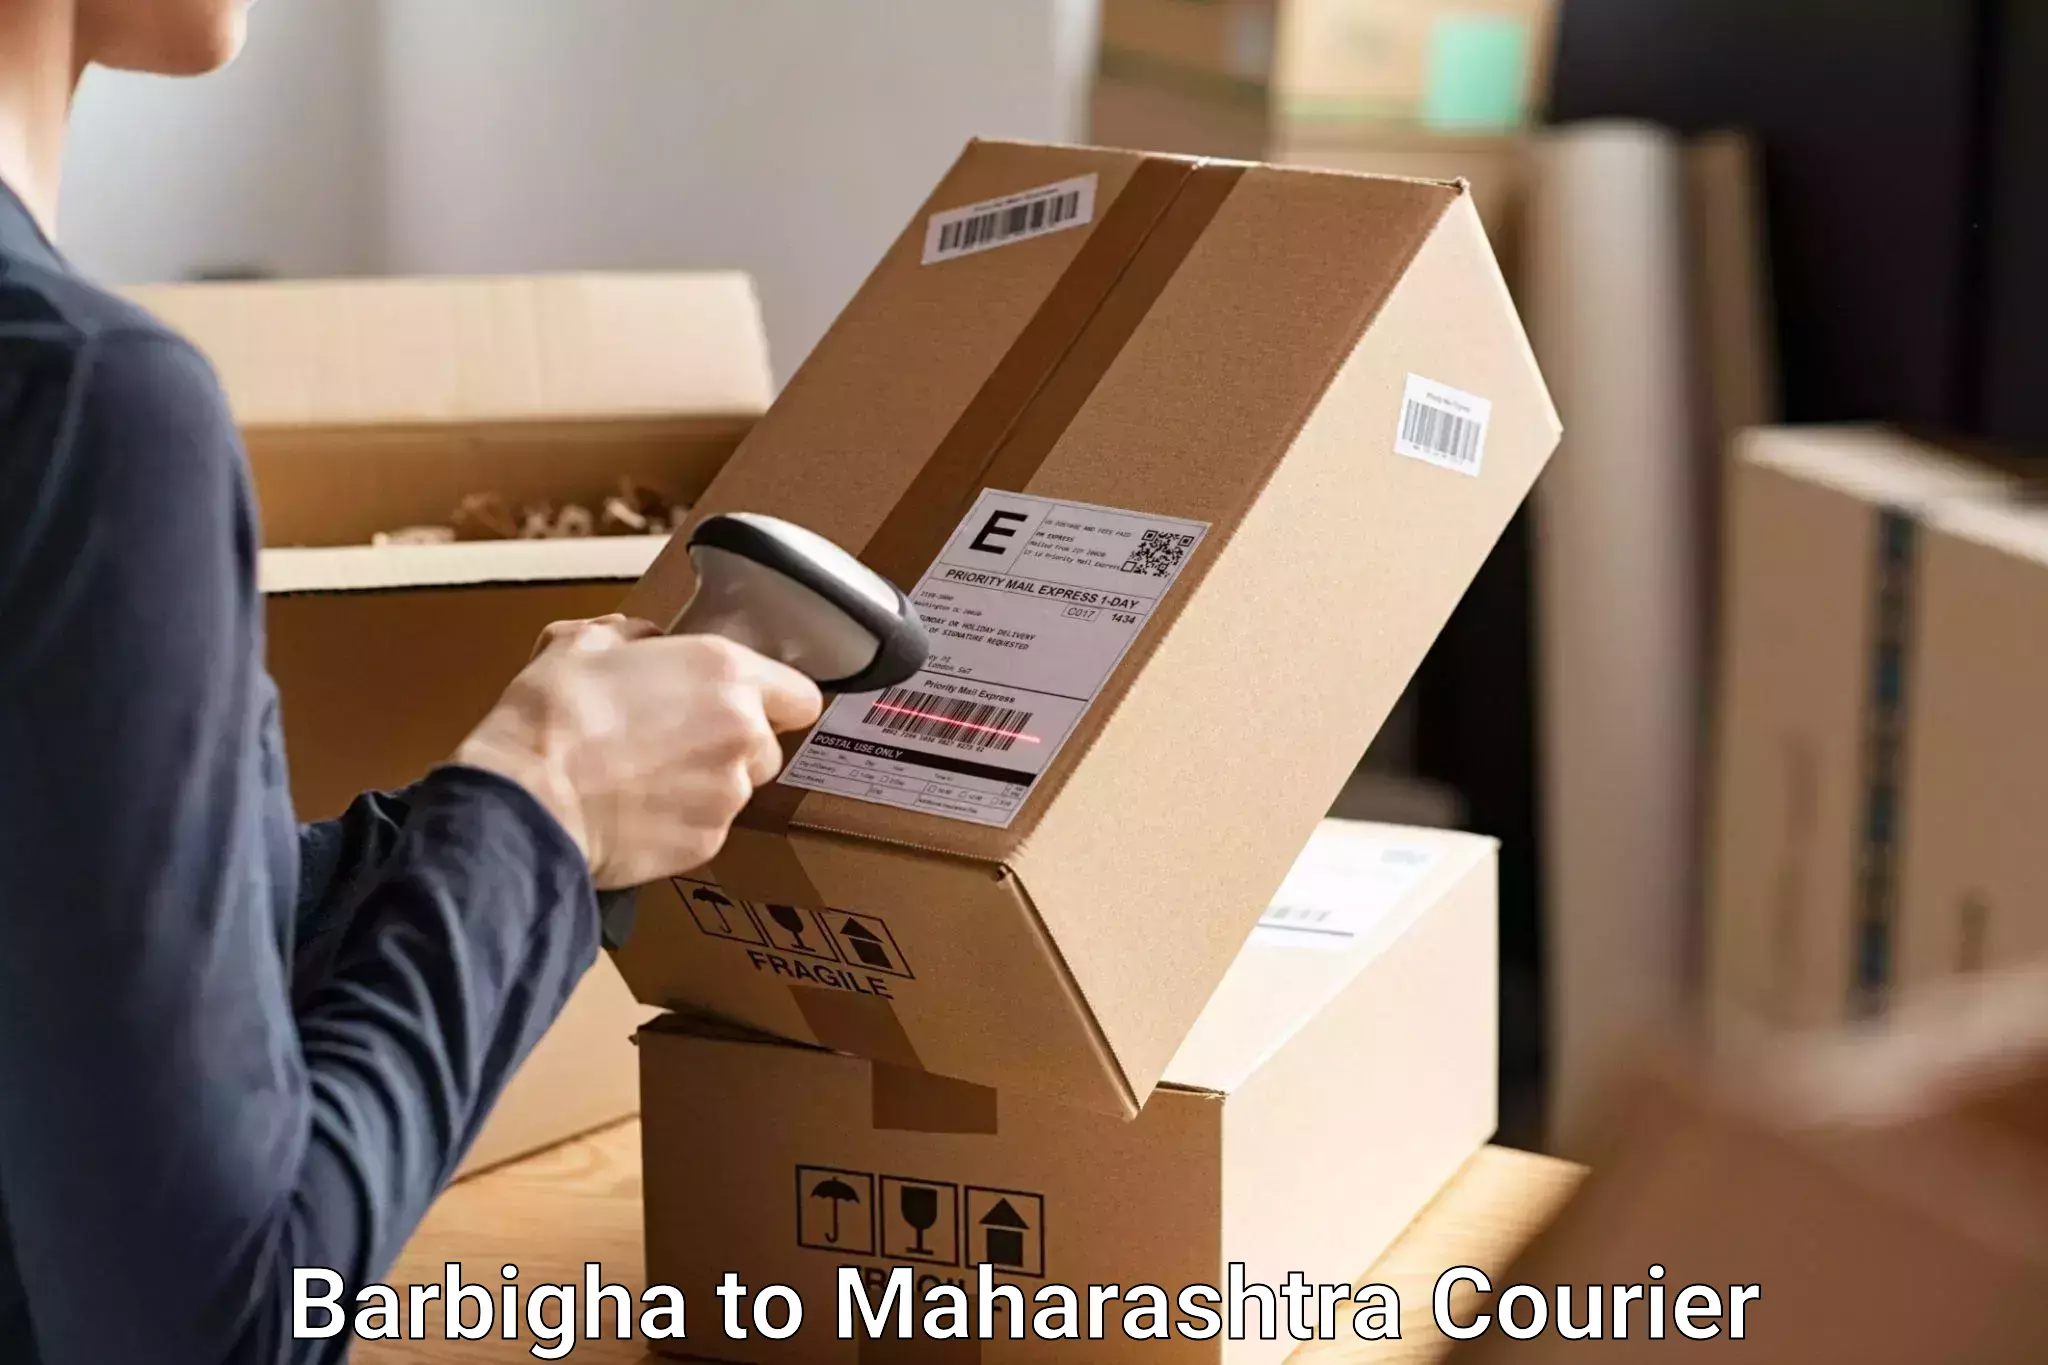 Baggage shipping experts Barbigha to Talere